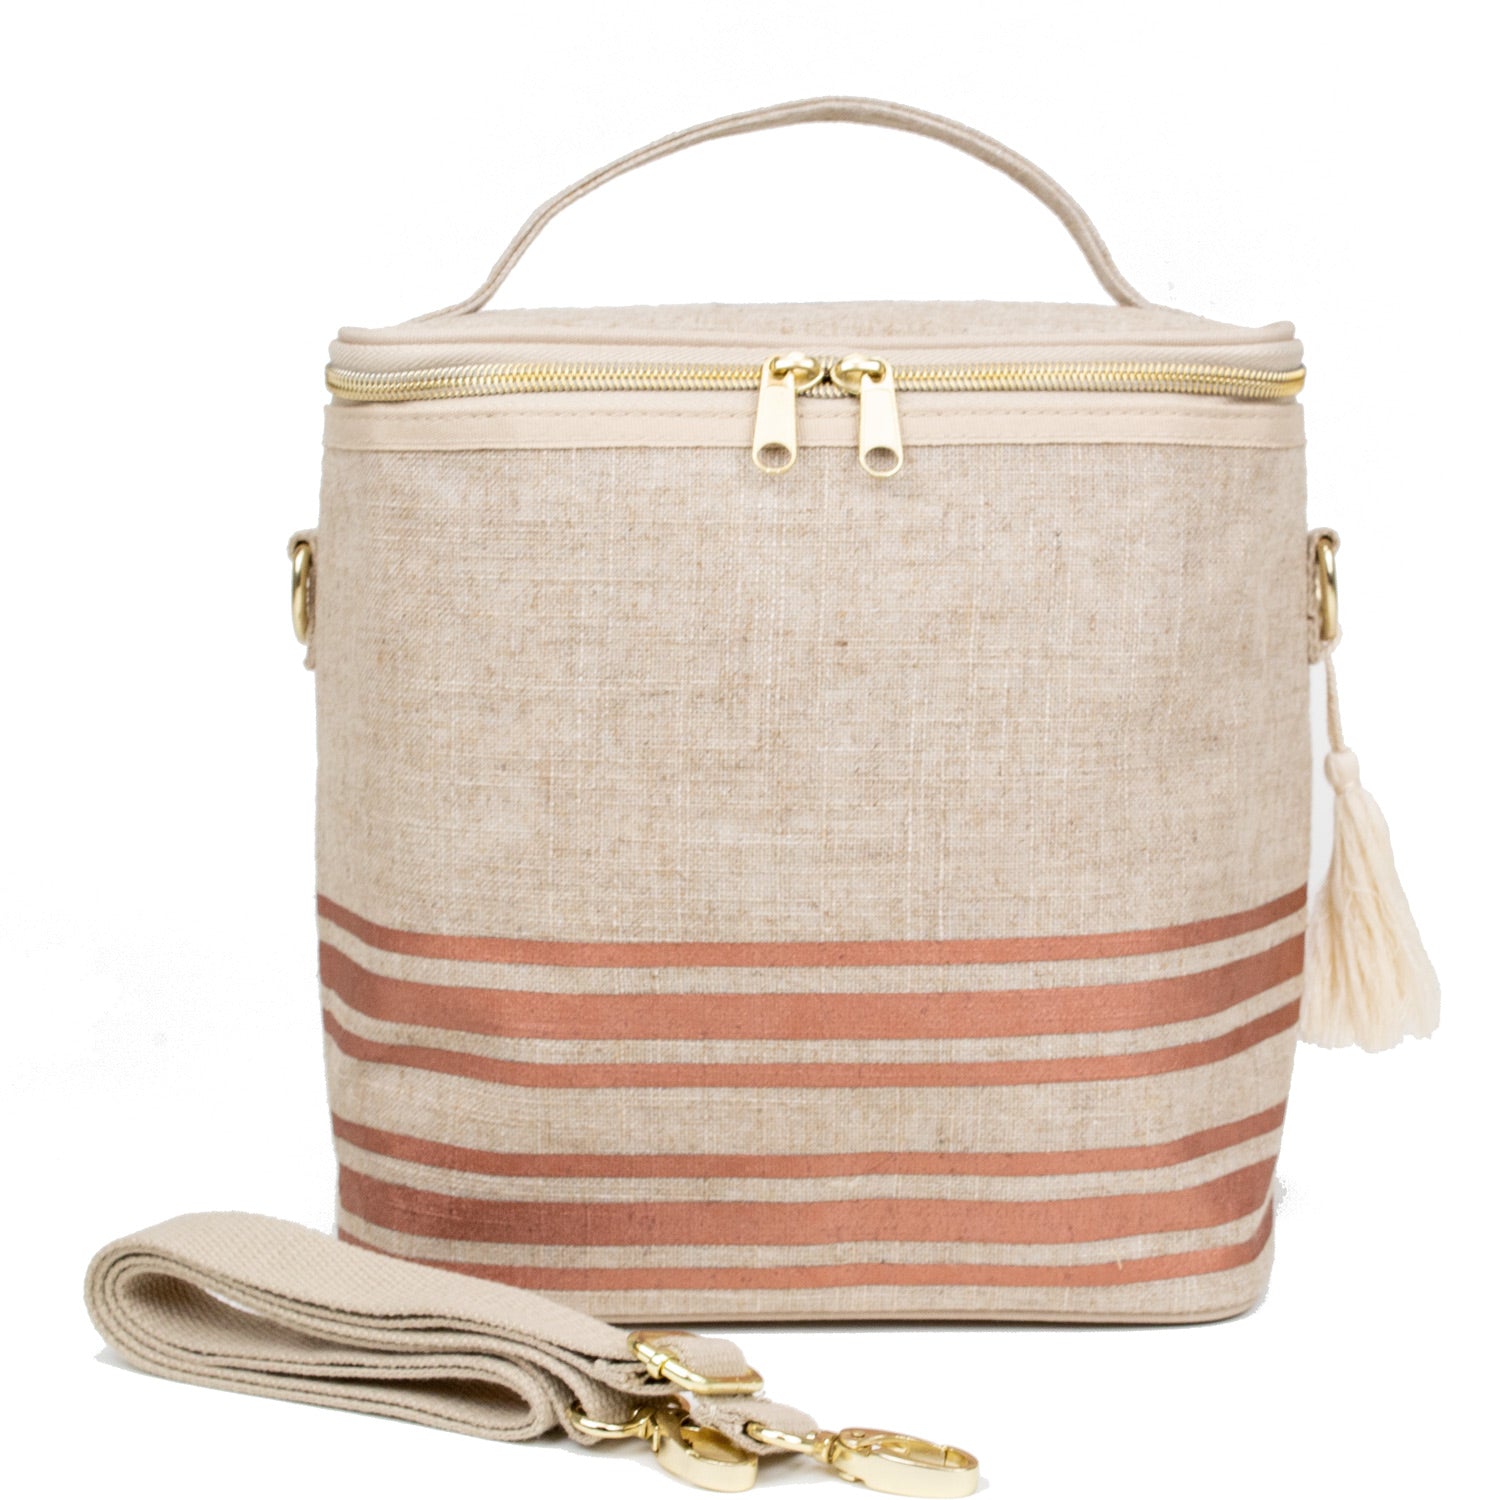 SoYoung Insulated Lunch Bag Rose Gold Stripes Linen Singapore